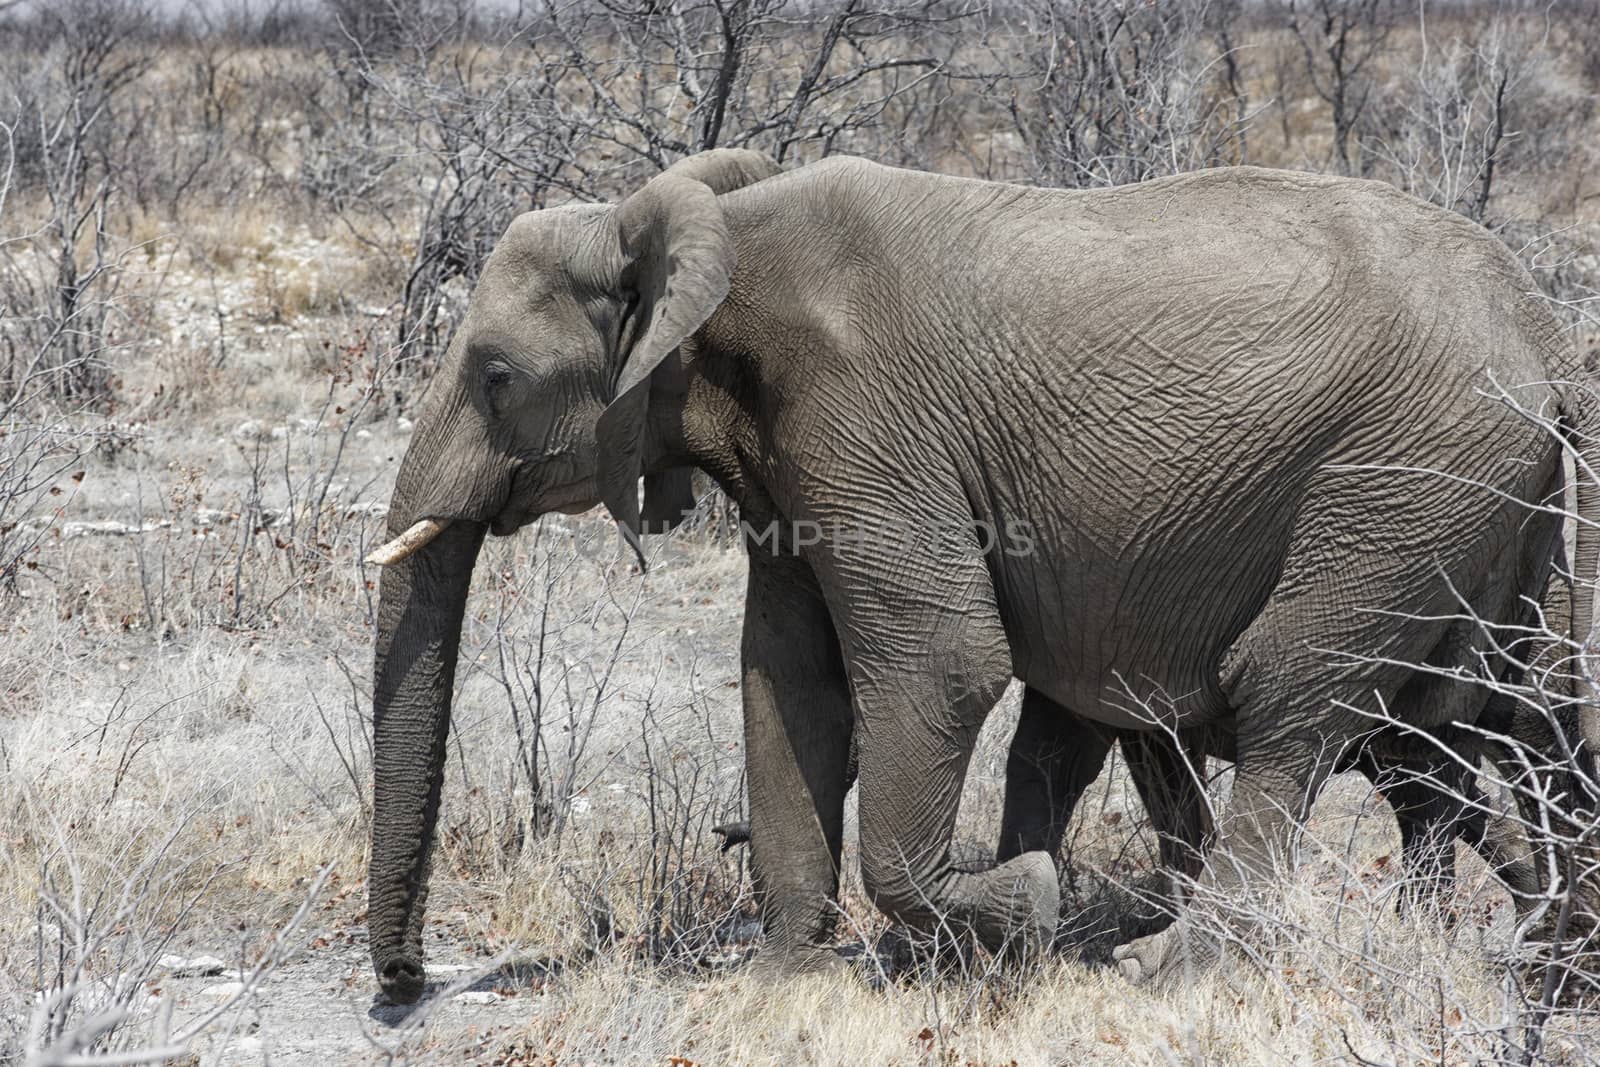 Desert elephant walking in the dried up Hoanib river in Namibia. Desert elephants are african bush elephants that have made their homes in the Namib deserts. Are solitary and roam over large areas 